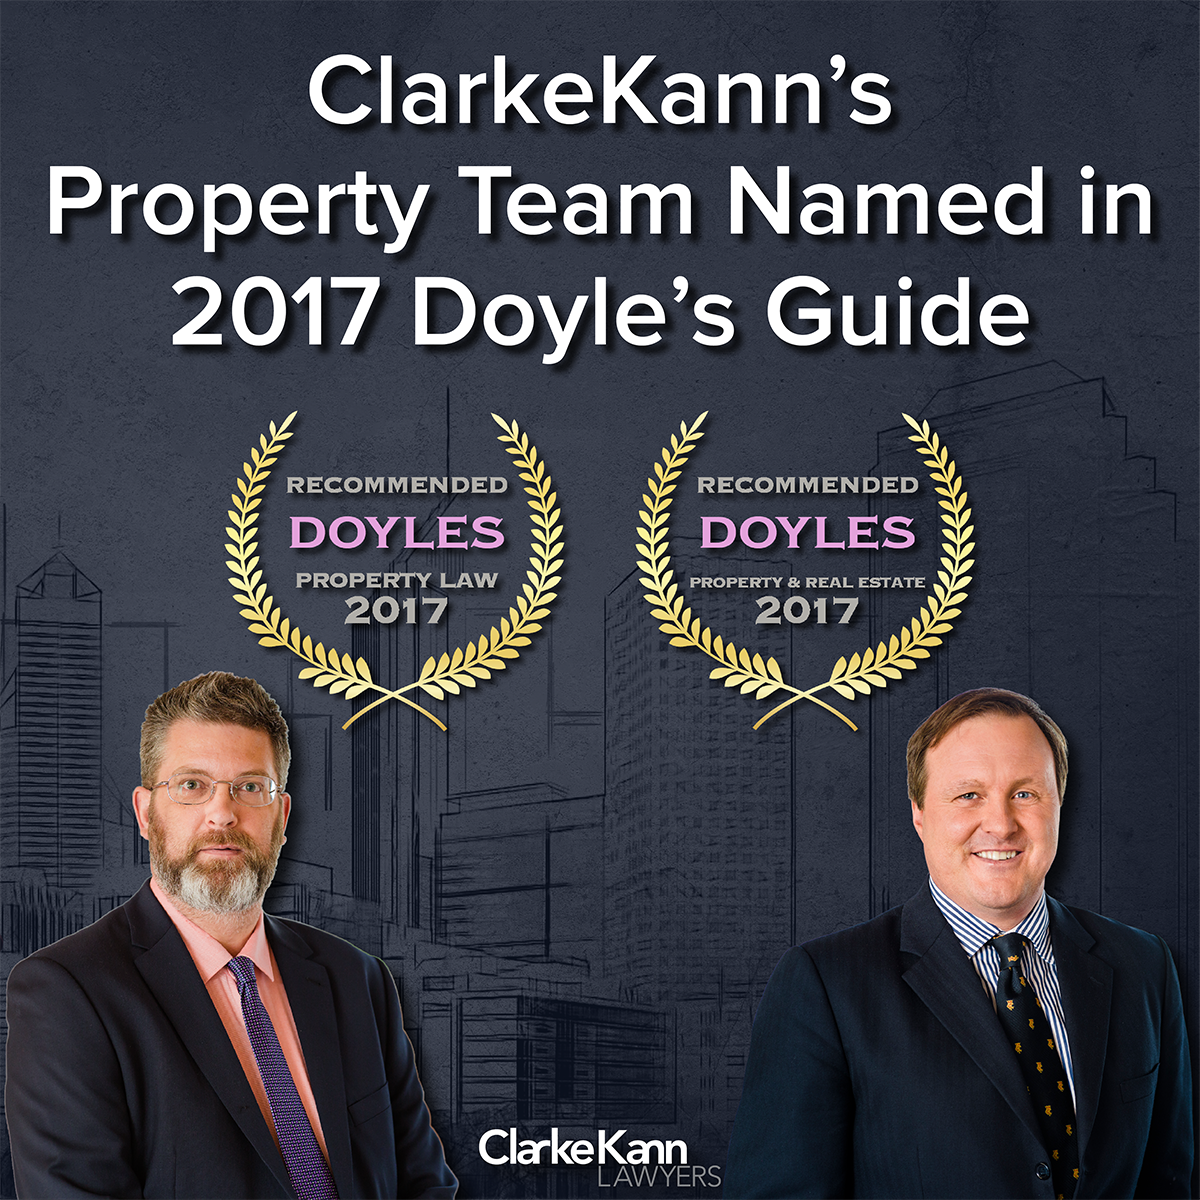 STOP PRESS: ClarkeKann’s Property Team Named in the 2017 Doyle’s Guide